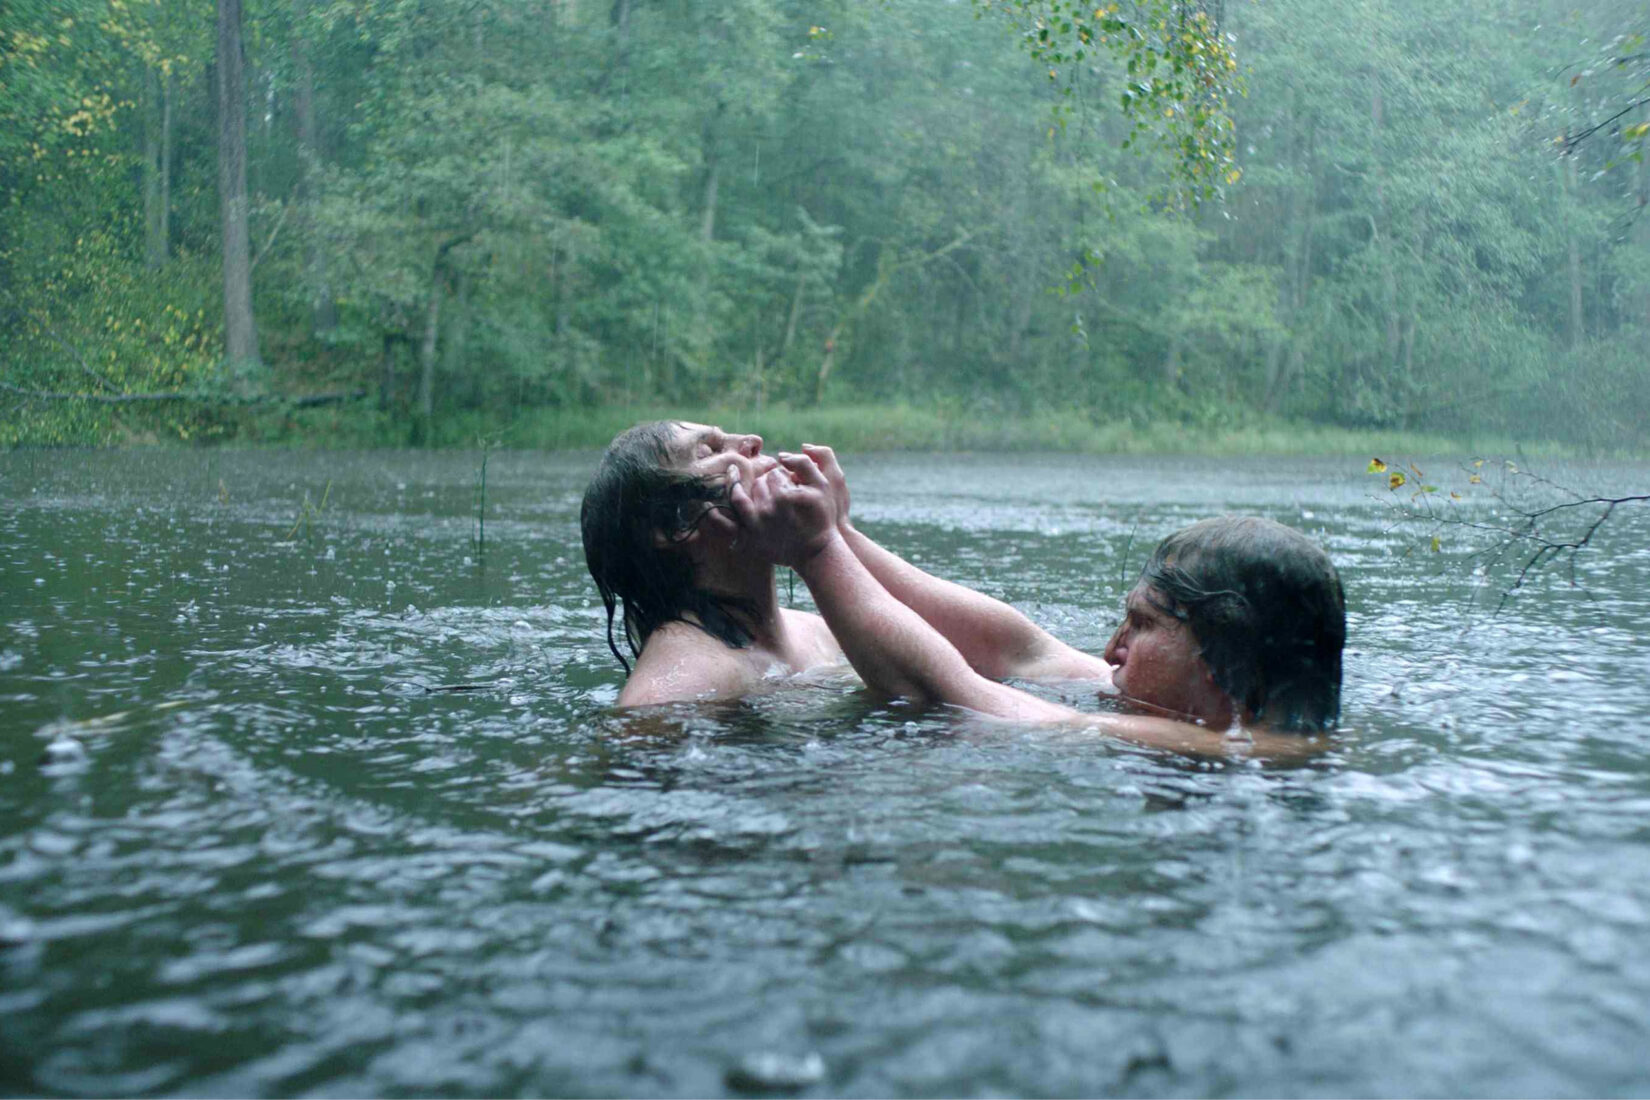 Two people are immerged in a lake or a river, in the rain, fighting with one another.